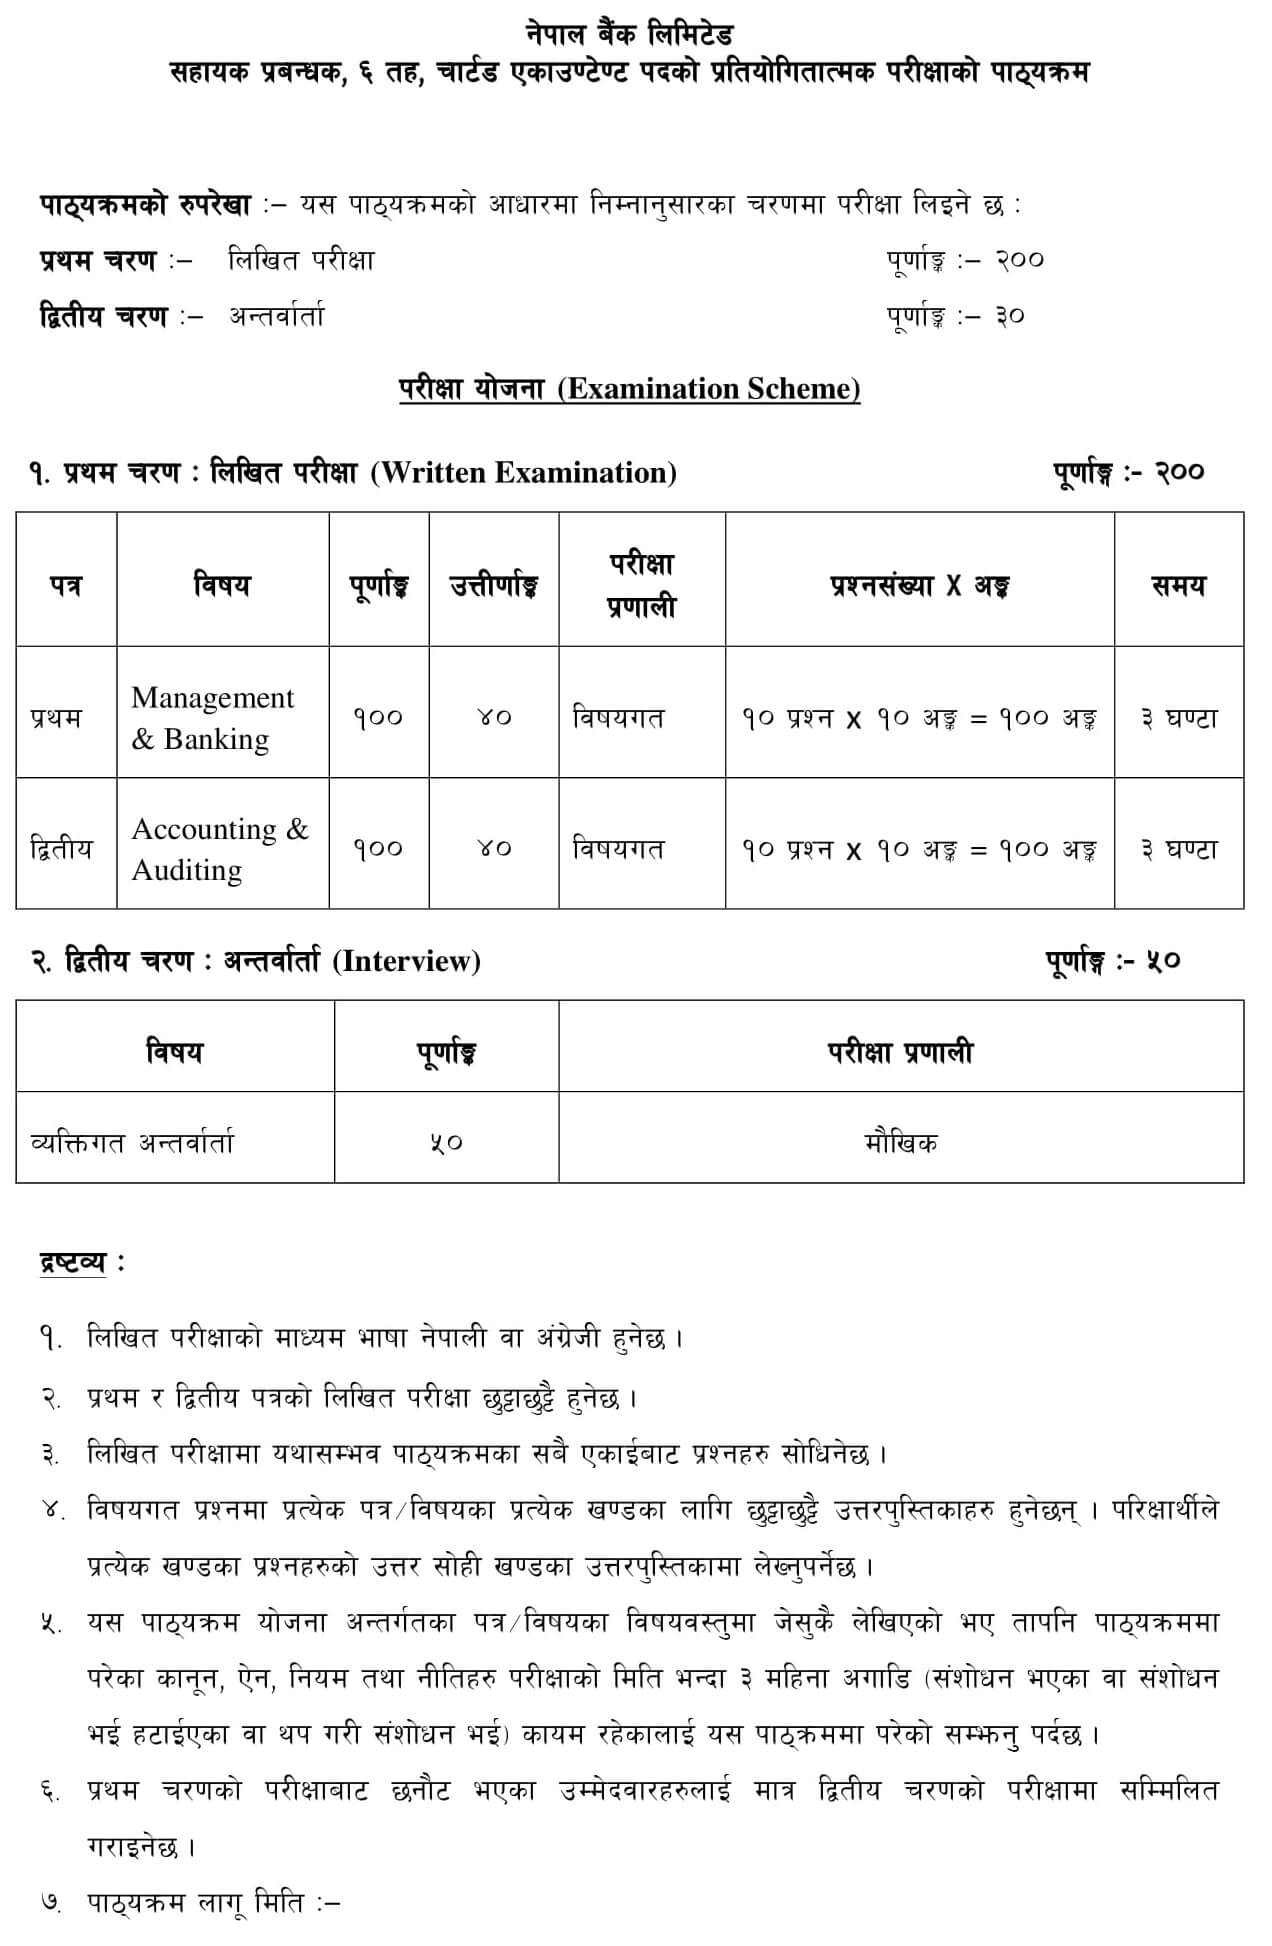 Syllabus of Nepal Bank Limited Level 6 Chartered Accountant